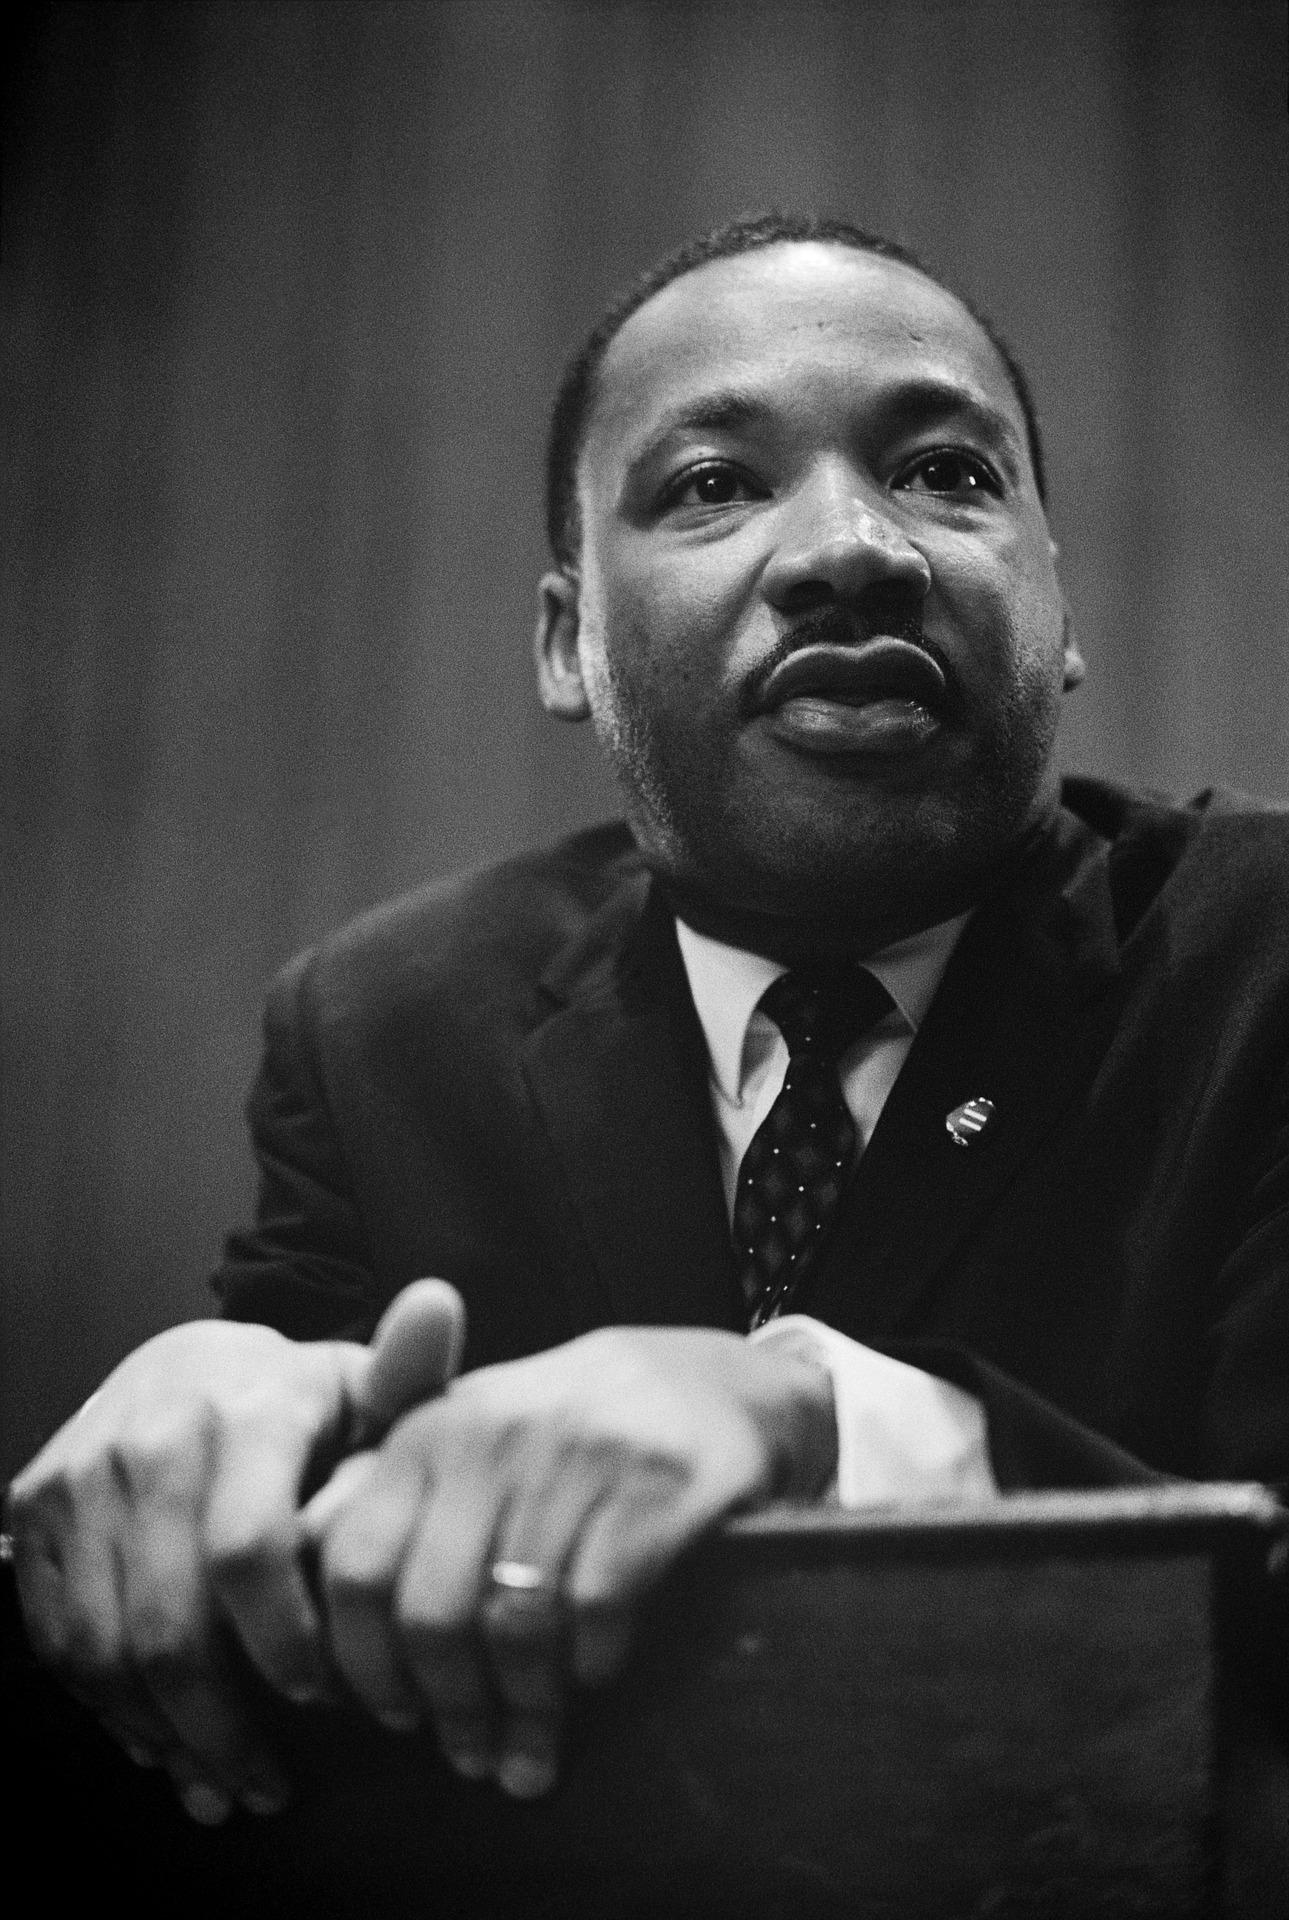 Image of Martin Luther King